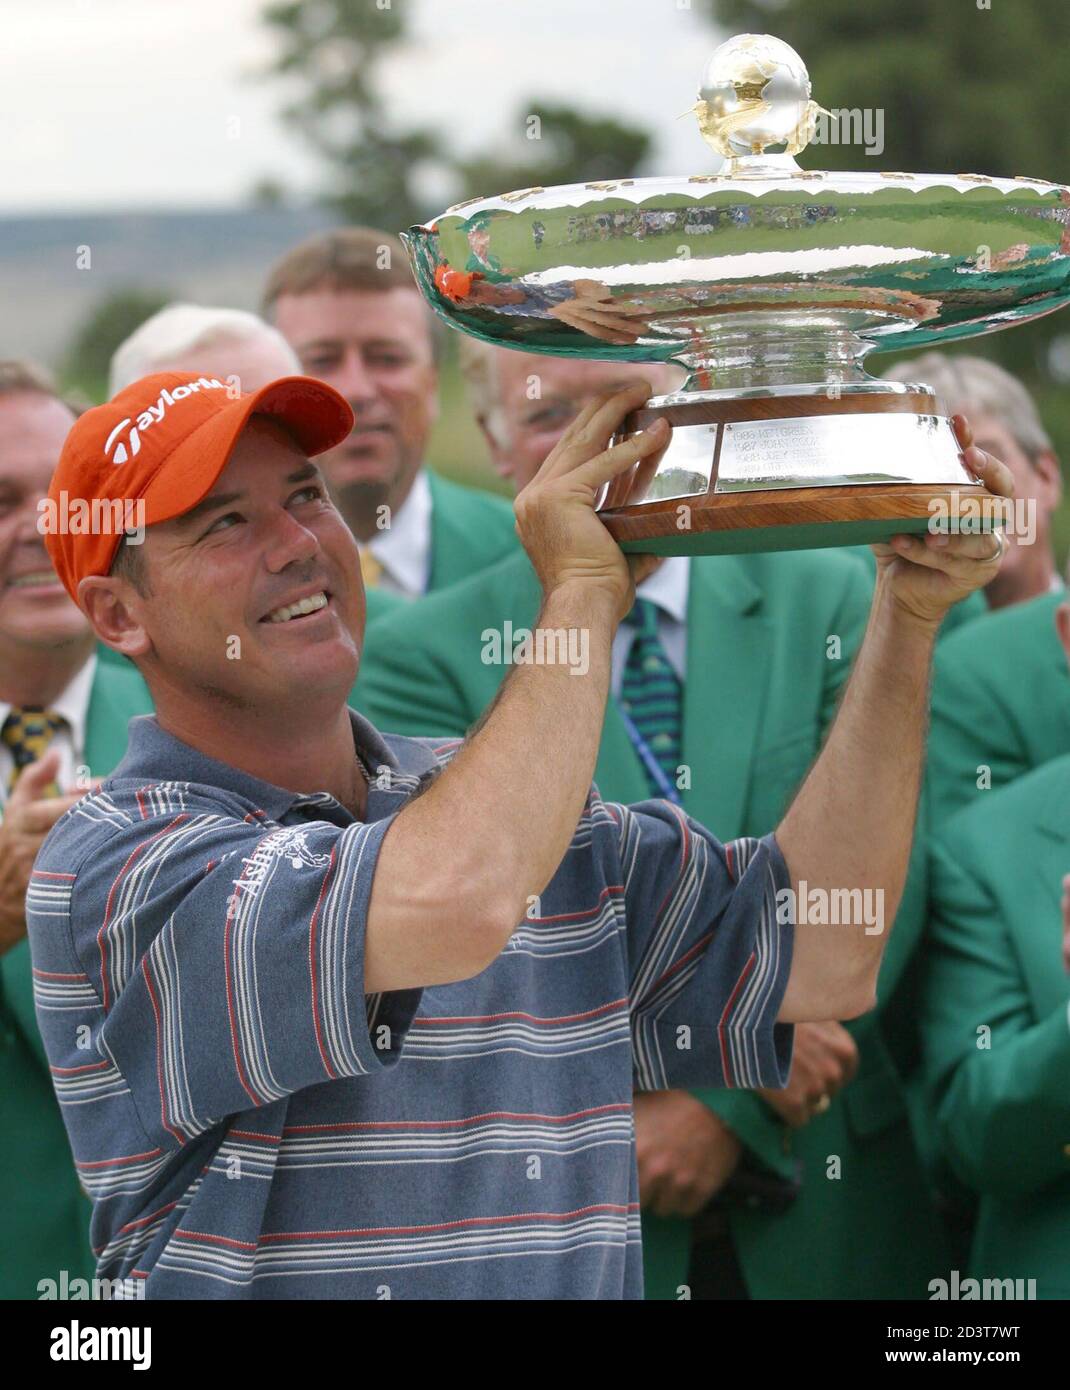 Rich Beem of the United States hoists the winners cup at the International at Castle Pines Golf Club in Castle Rock, Colorado, August 4, 2002. Beem edged out Steve Lowrey 44-43 in the modified Stableford scoring to win the International. REUTERS/Gary C. Caskey  GCC/SV Stock Photo